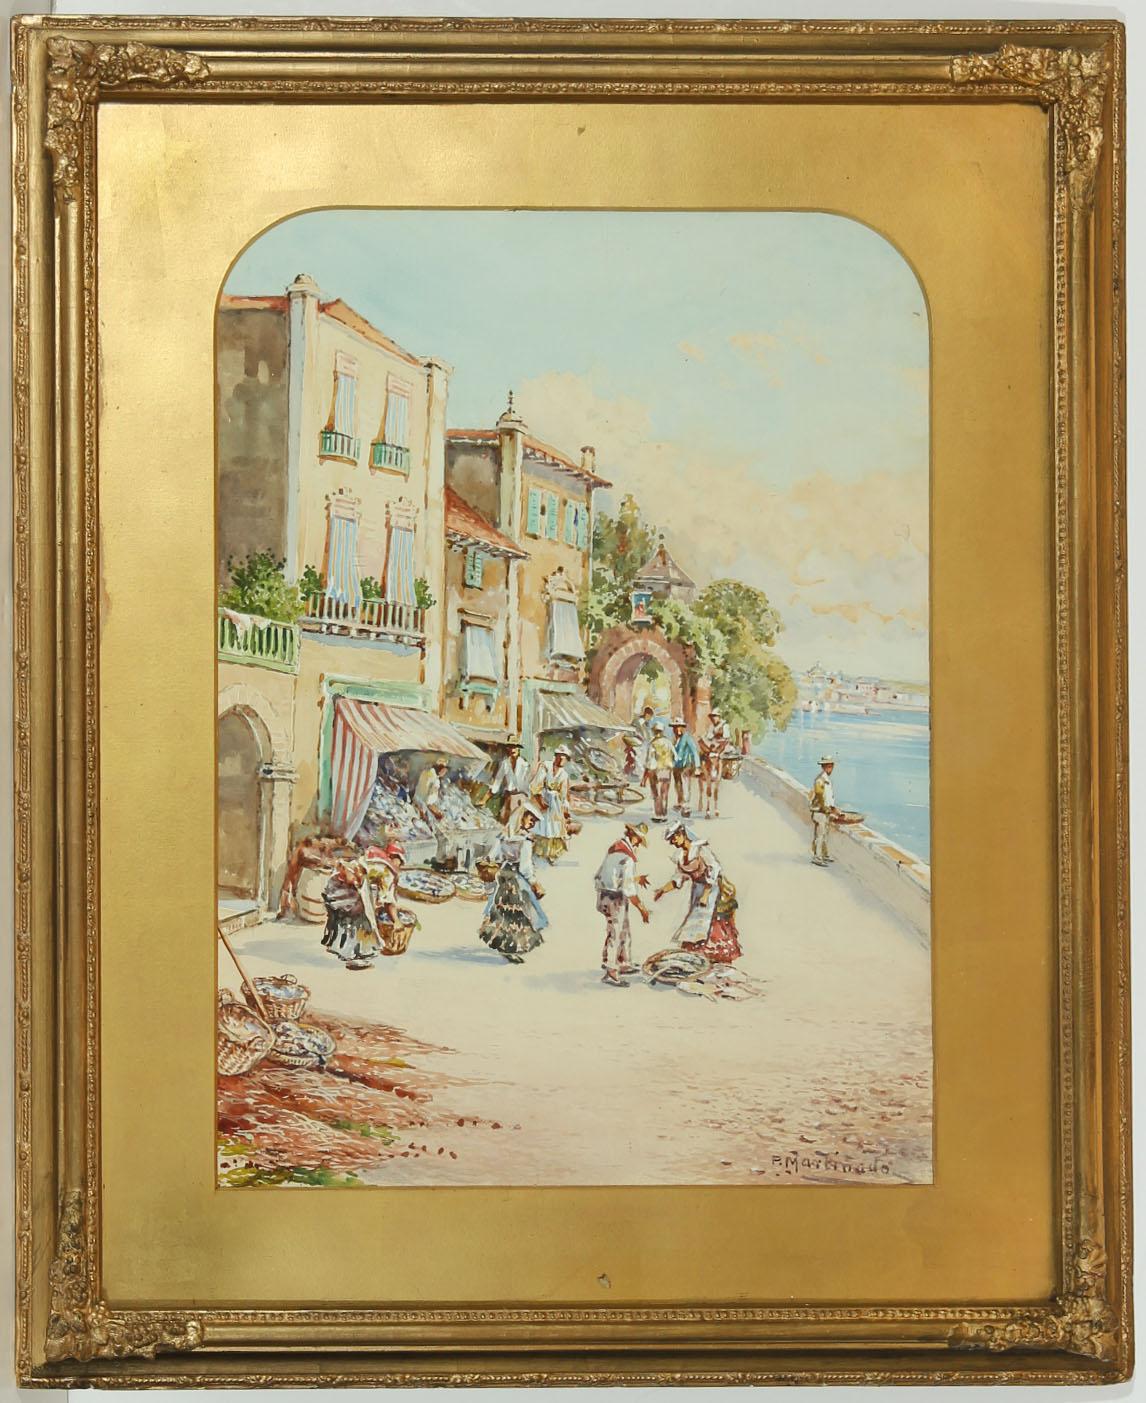 A beautifully painted Italian scene with a lakeside market. Excellently presented in a gilt mount with rounded upper corners, and a gilt frame with berry and leaf detail to the corners. On wove.